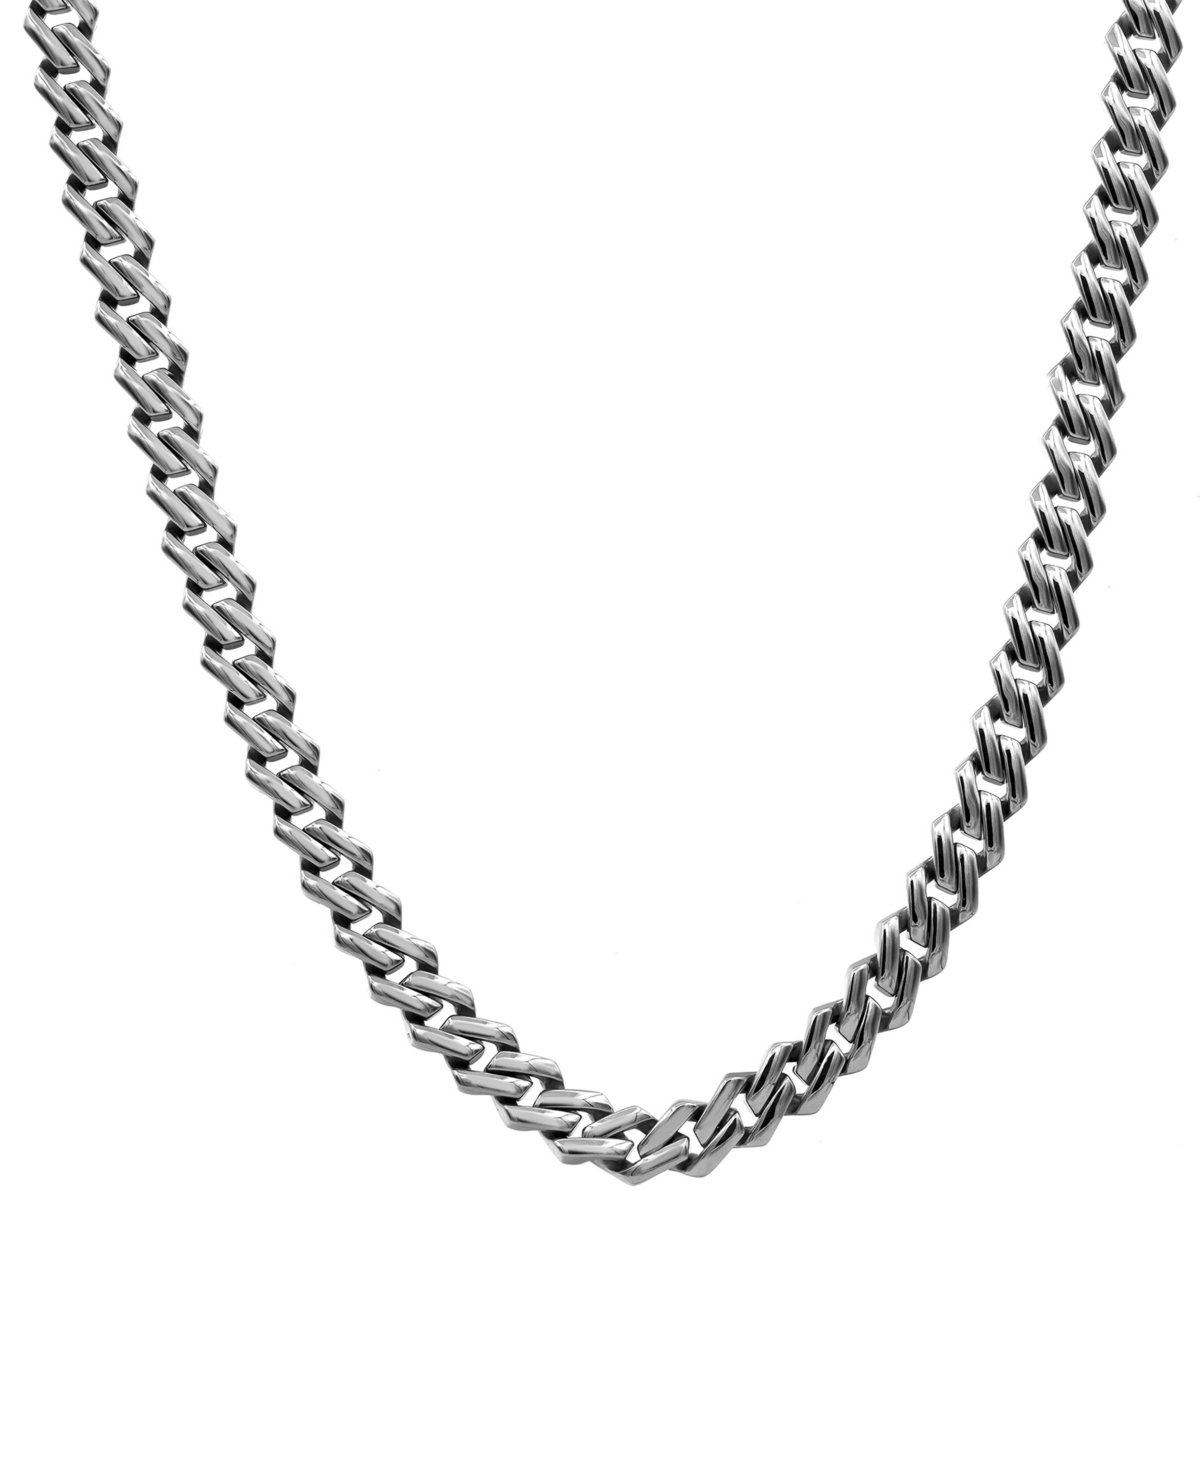 Men's Cubic Zirconia-Accented Curb Link 24" Chain Necklace in Stainless Steel - Gold-Tone